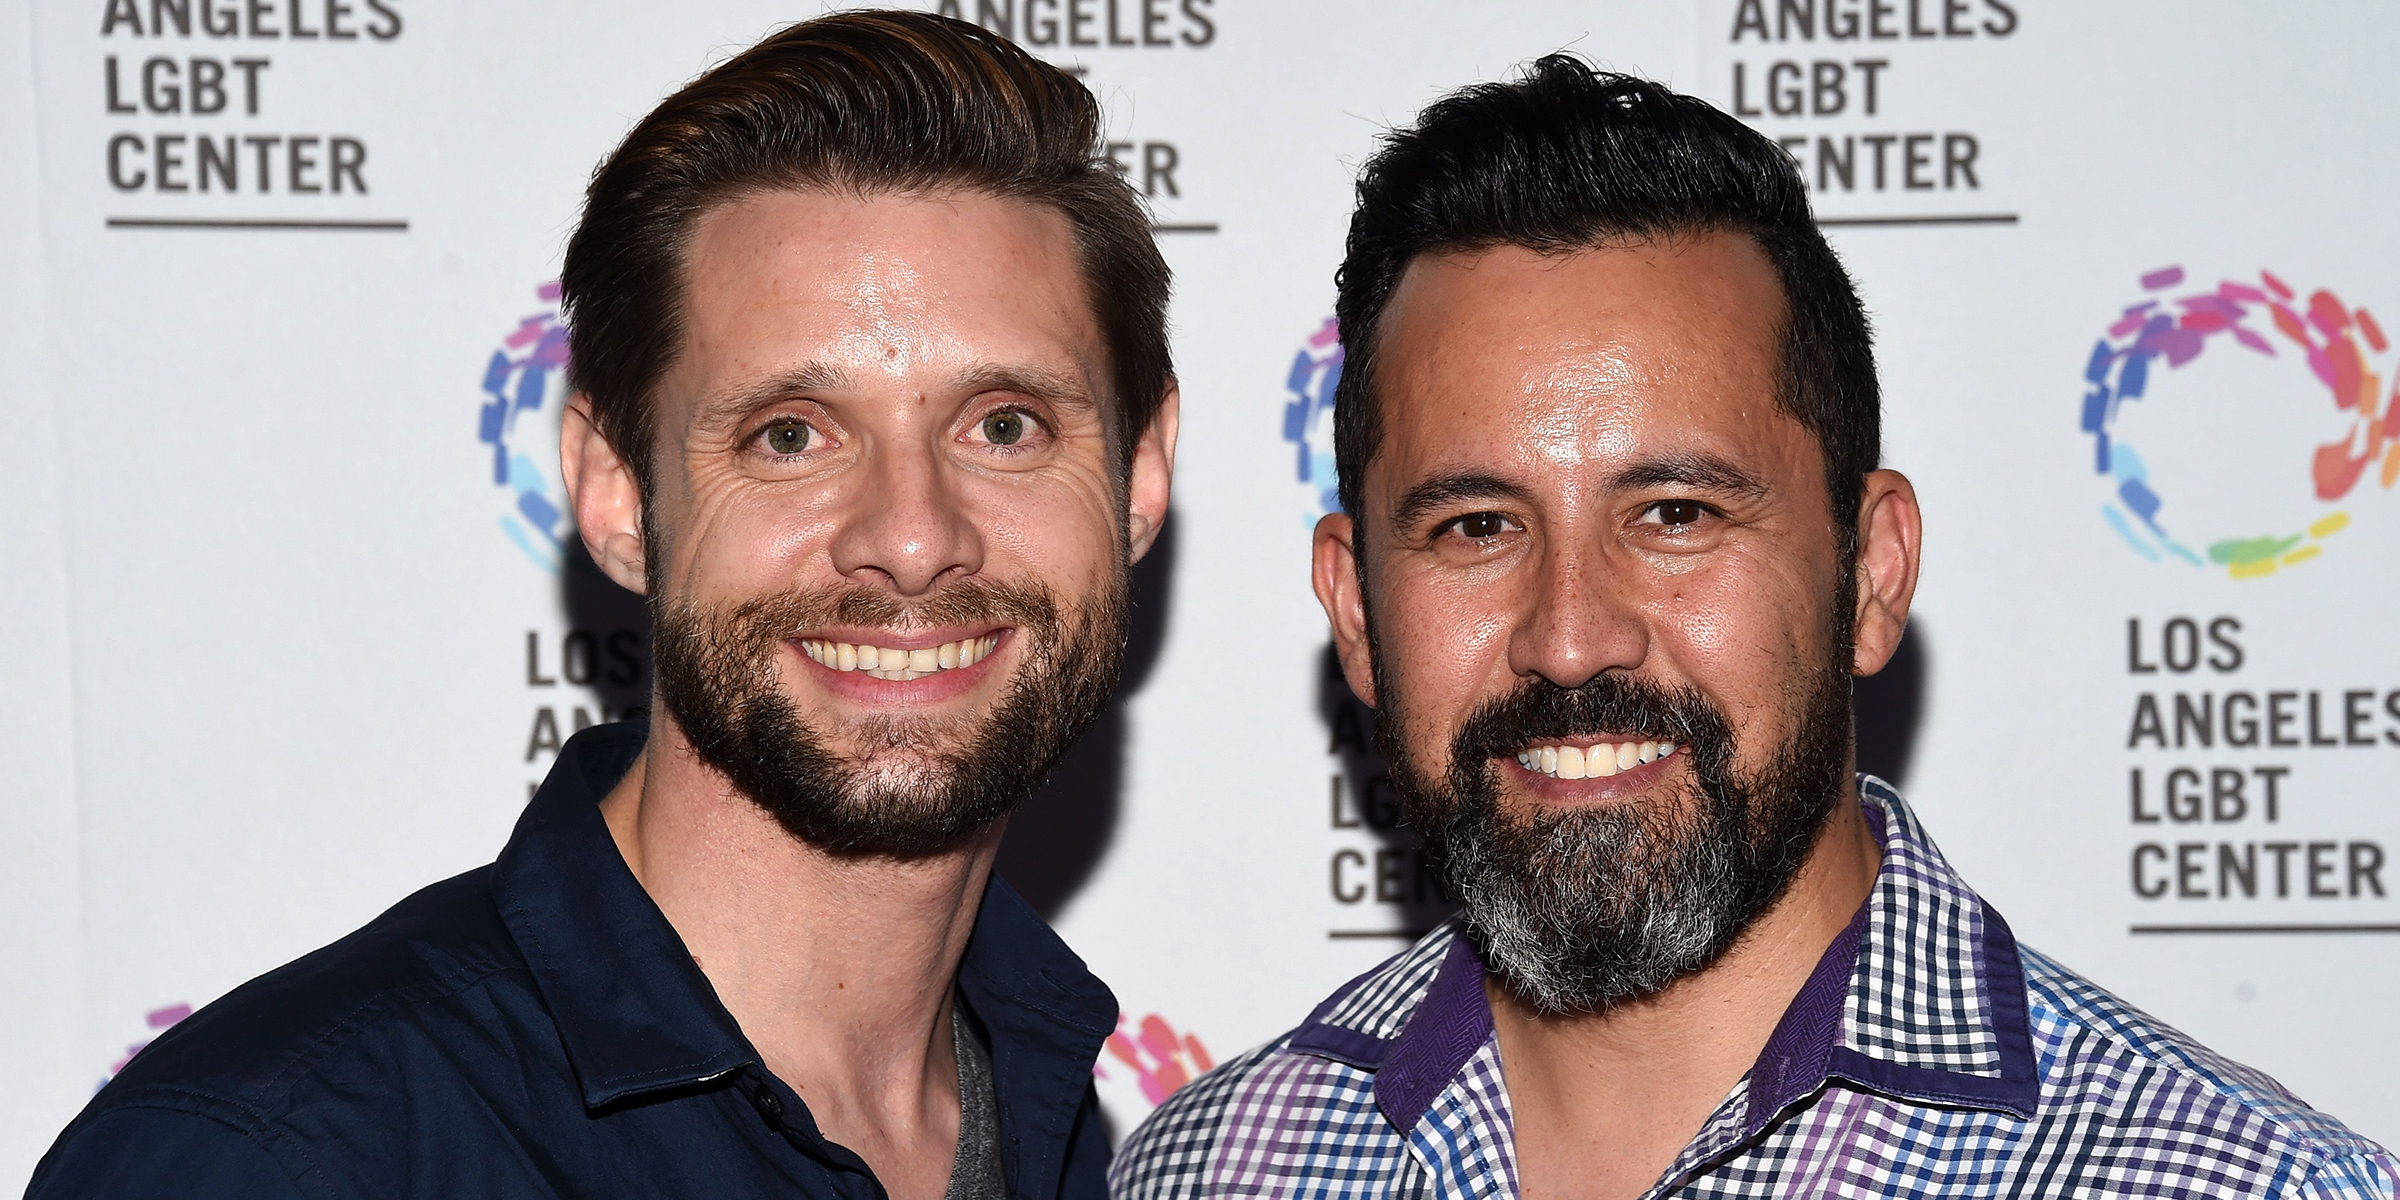 Danny Pintauro and Wil Tabares | Source: Getty Images